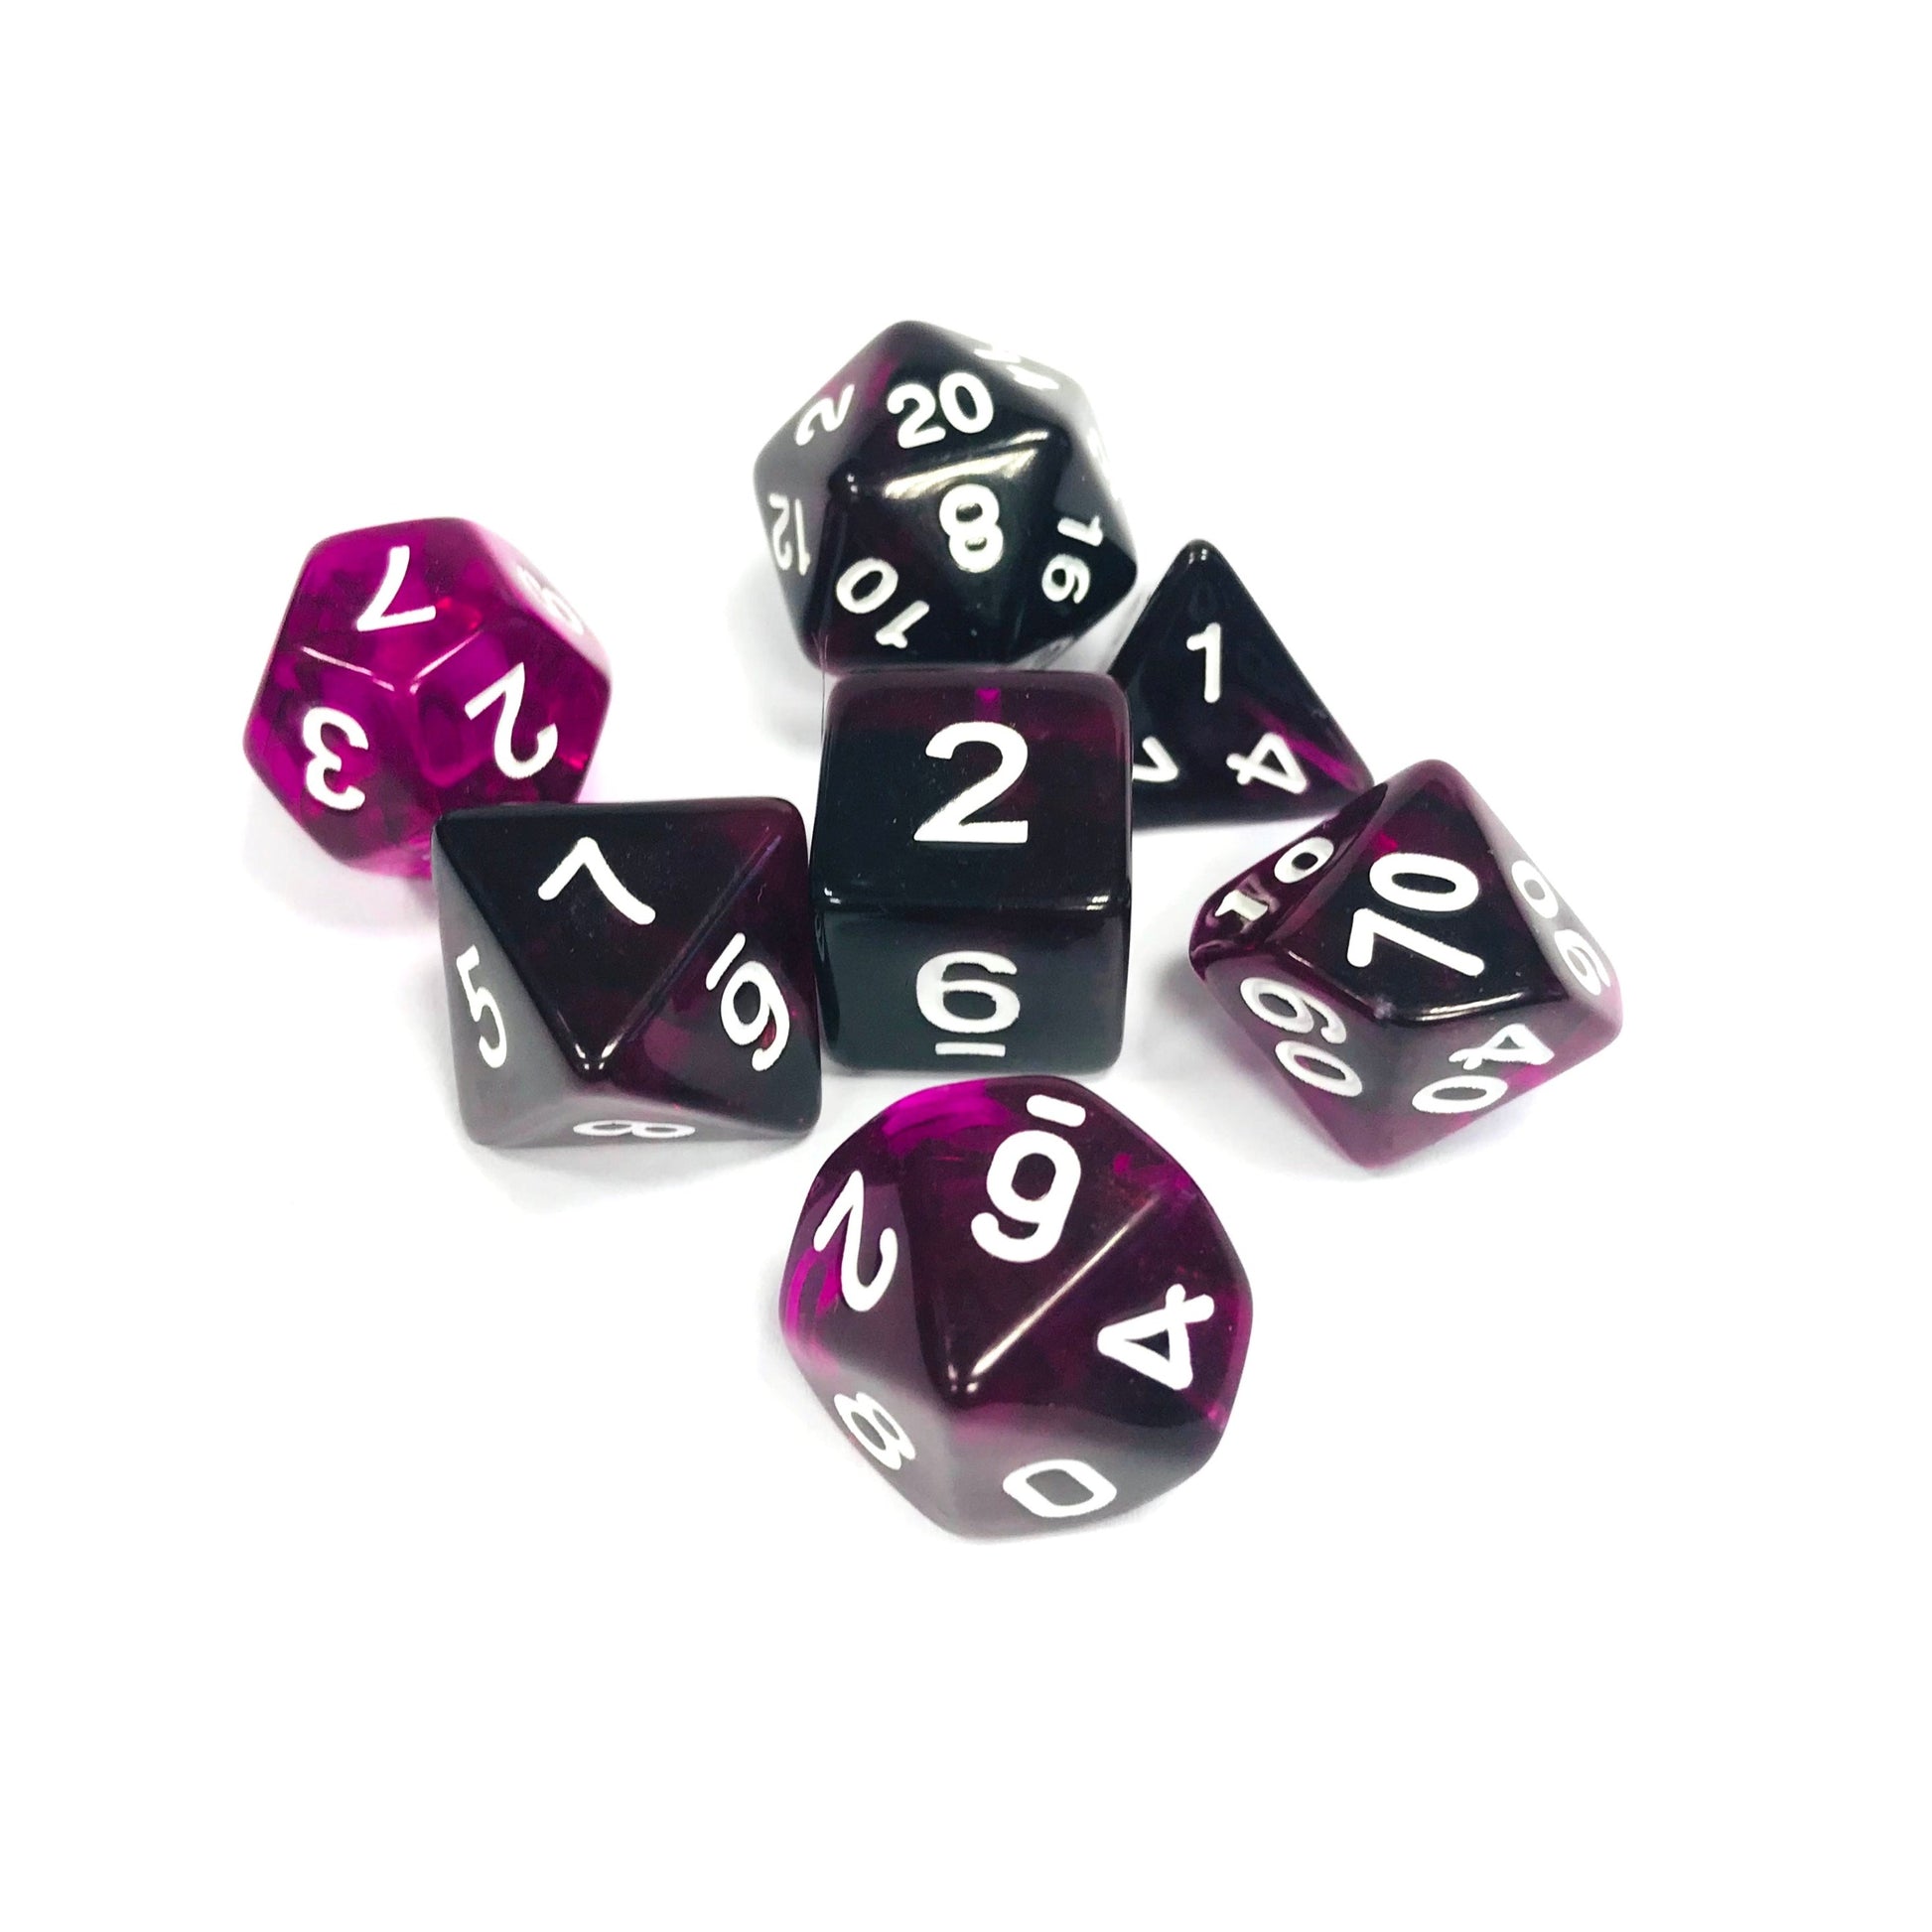 dnd dice set for role playing games, RPG, critical critters, dice goblin and dice dragon collectors